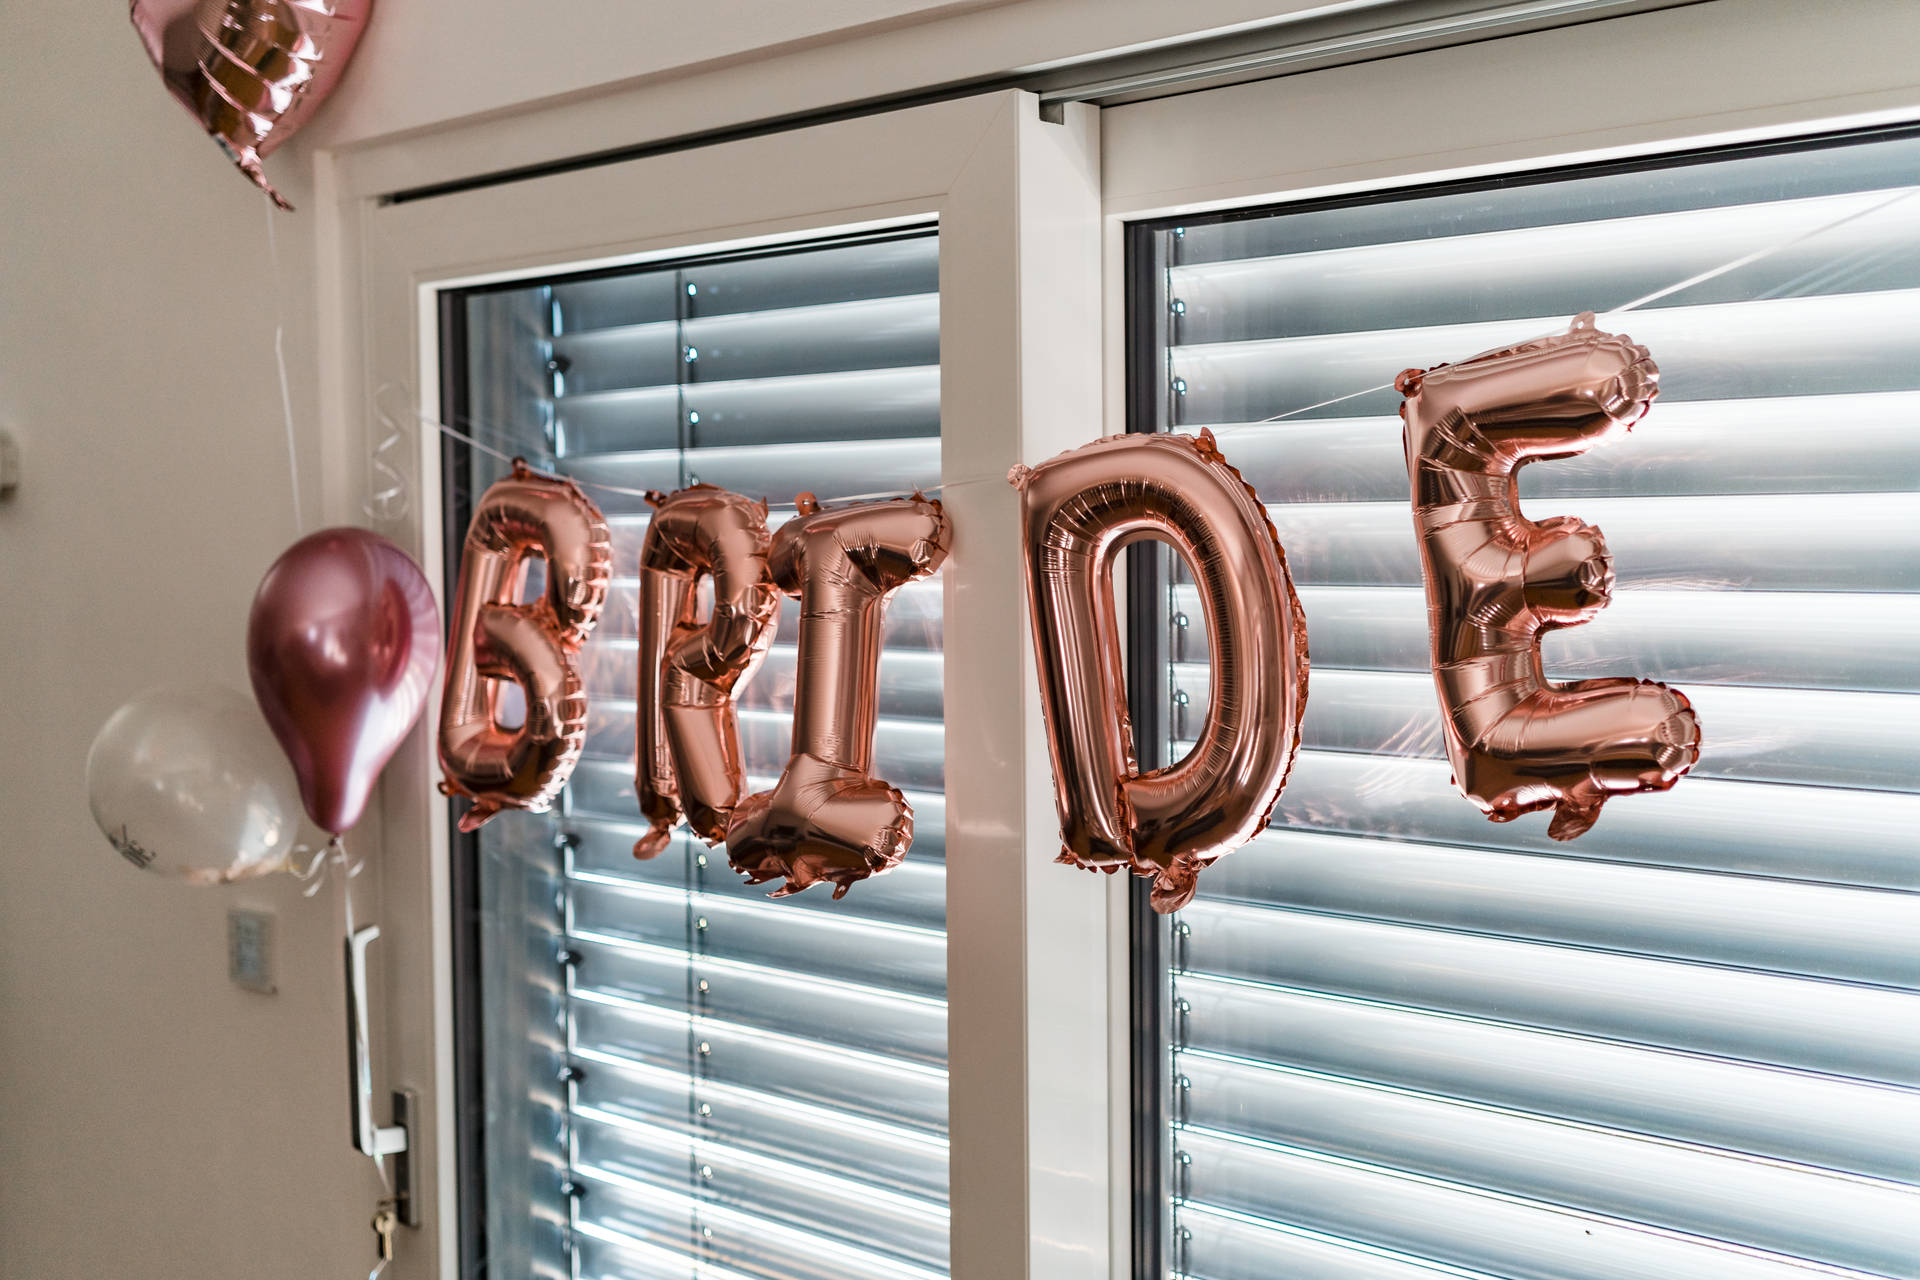 Bride Balloons At Bachelorette Party Background